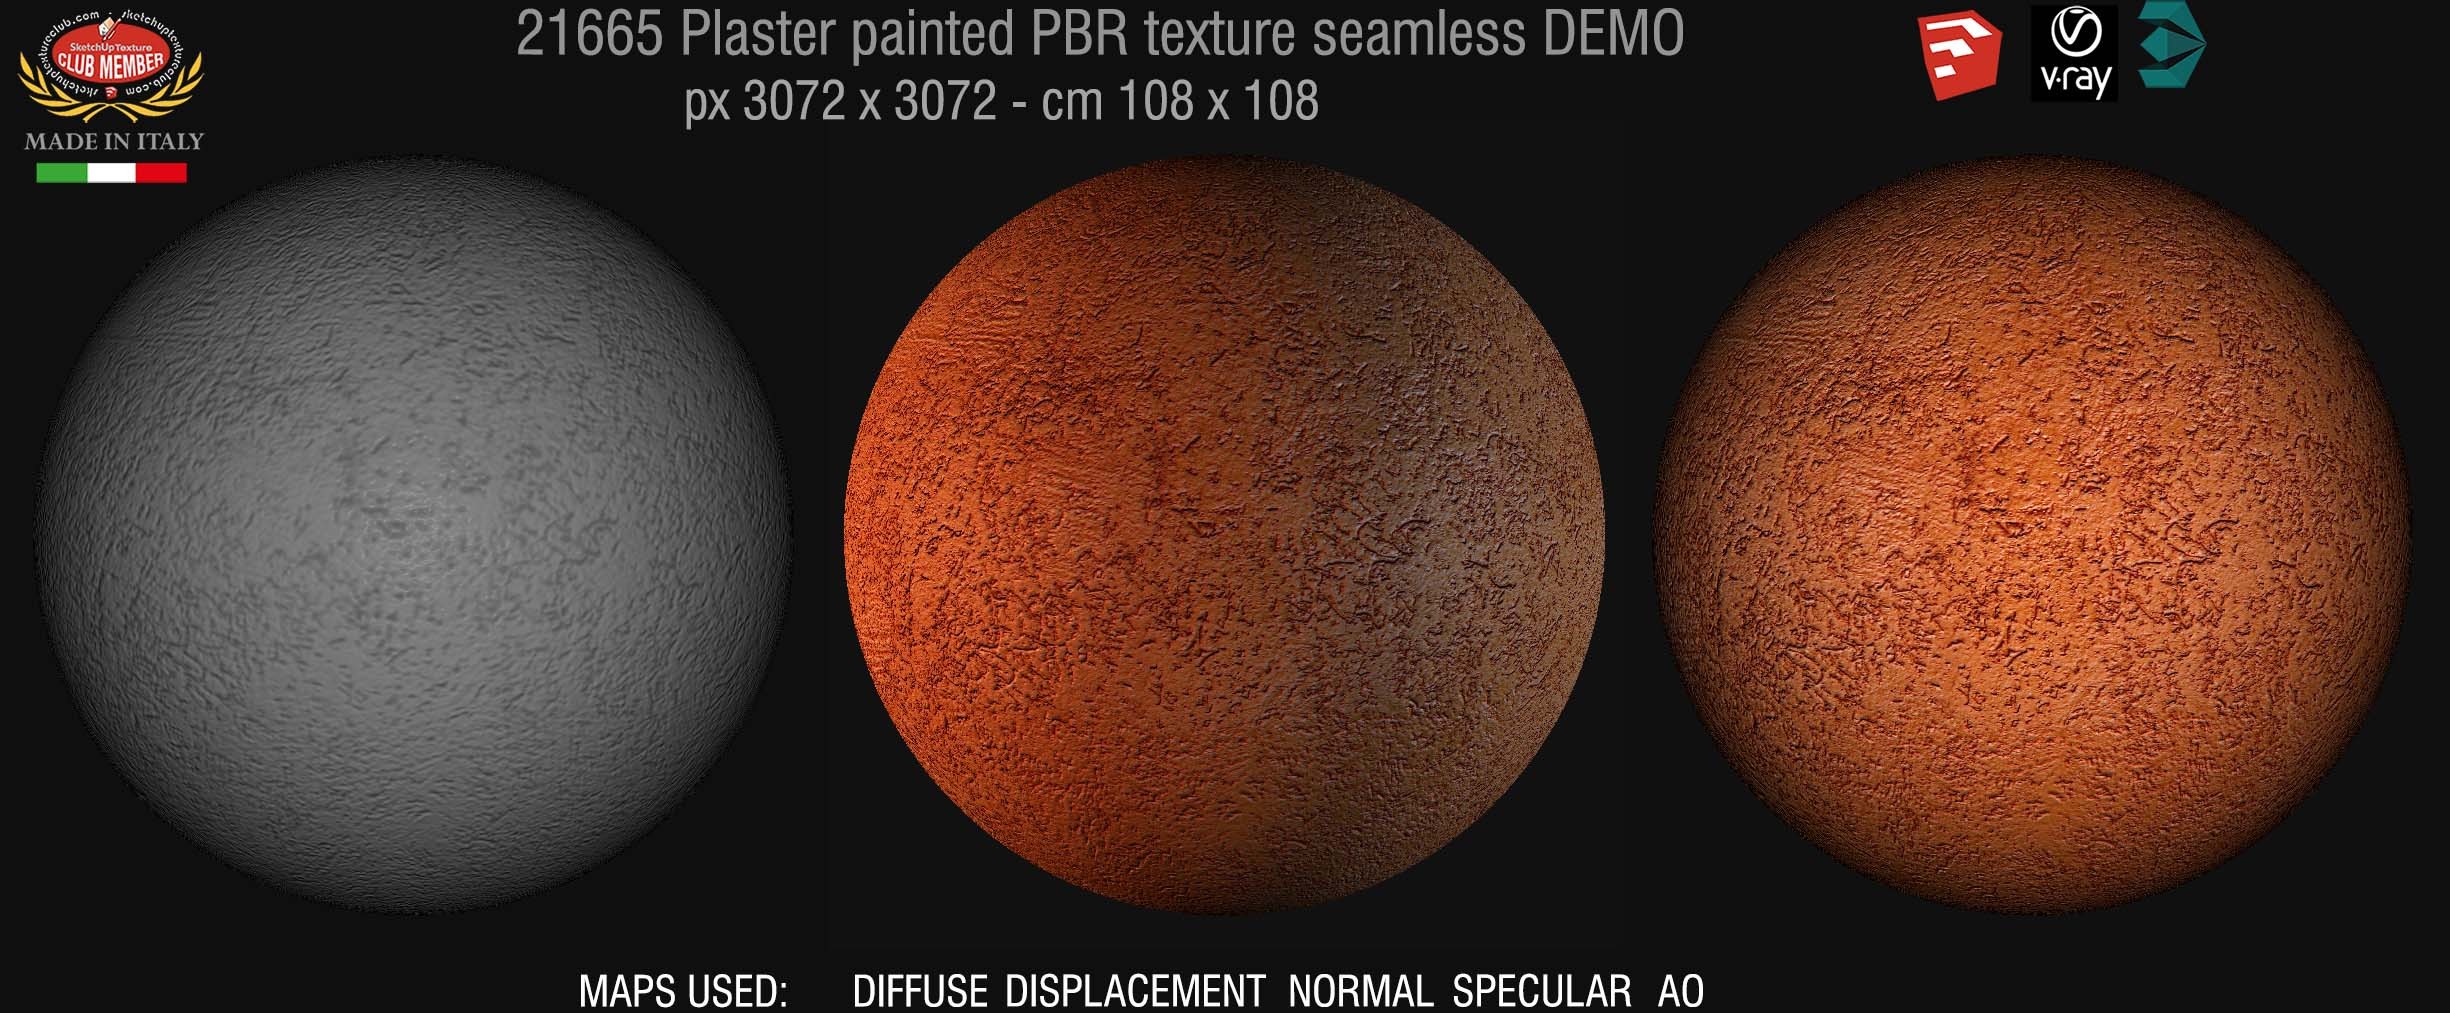 21665 plaster painted PBR texture seamless DEMO